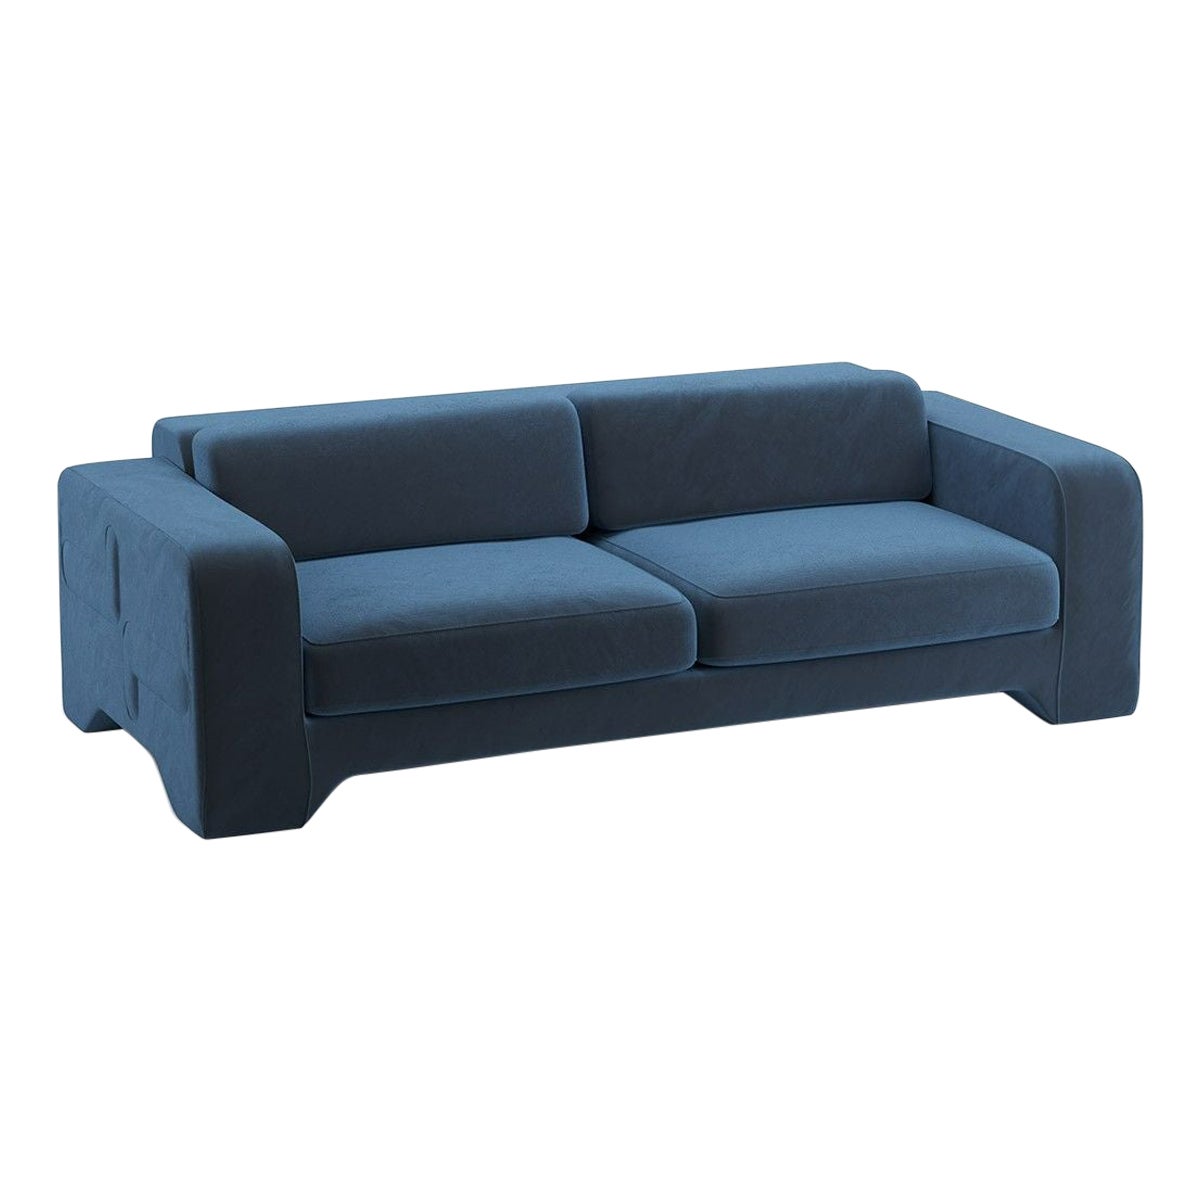 Popus Editions Giovanna 4 Seater Sofa in Blue Como Velvet Upholstery